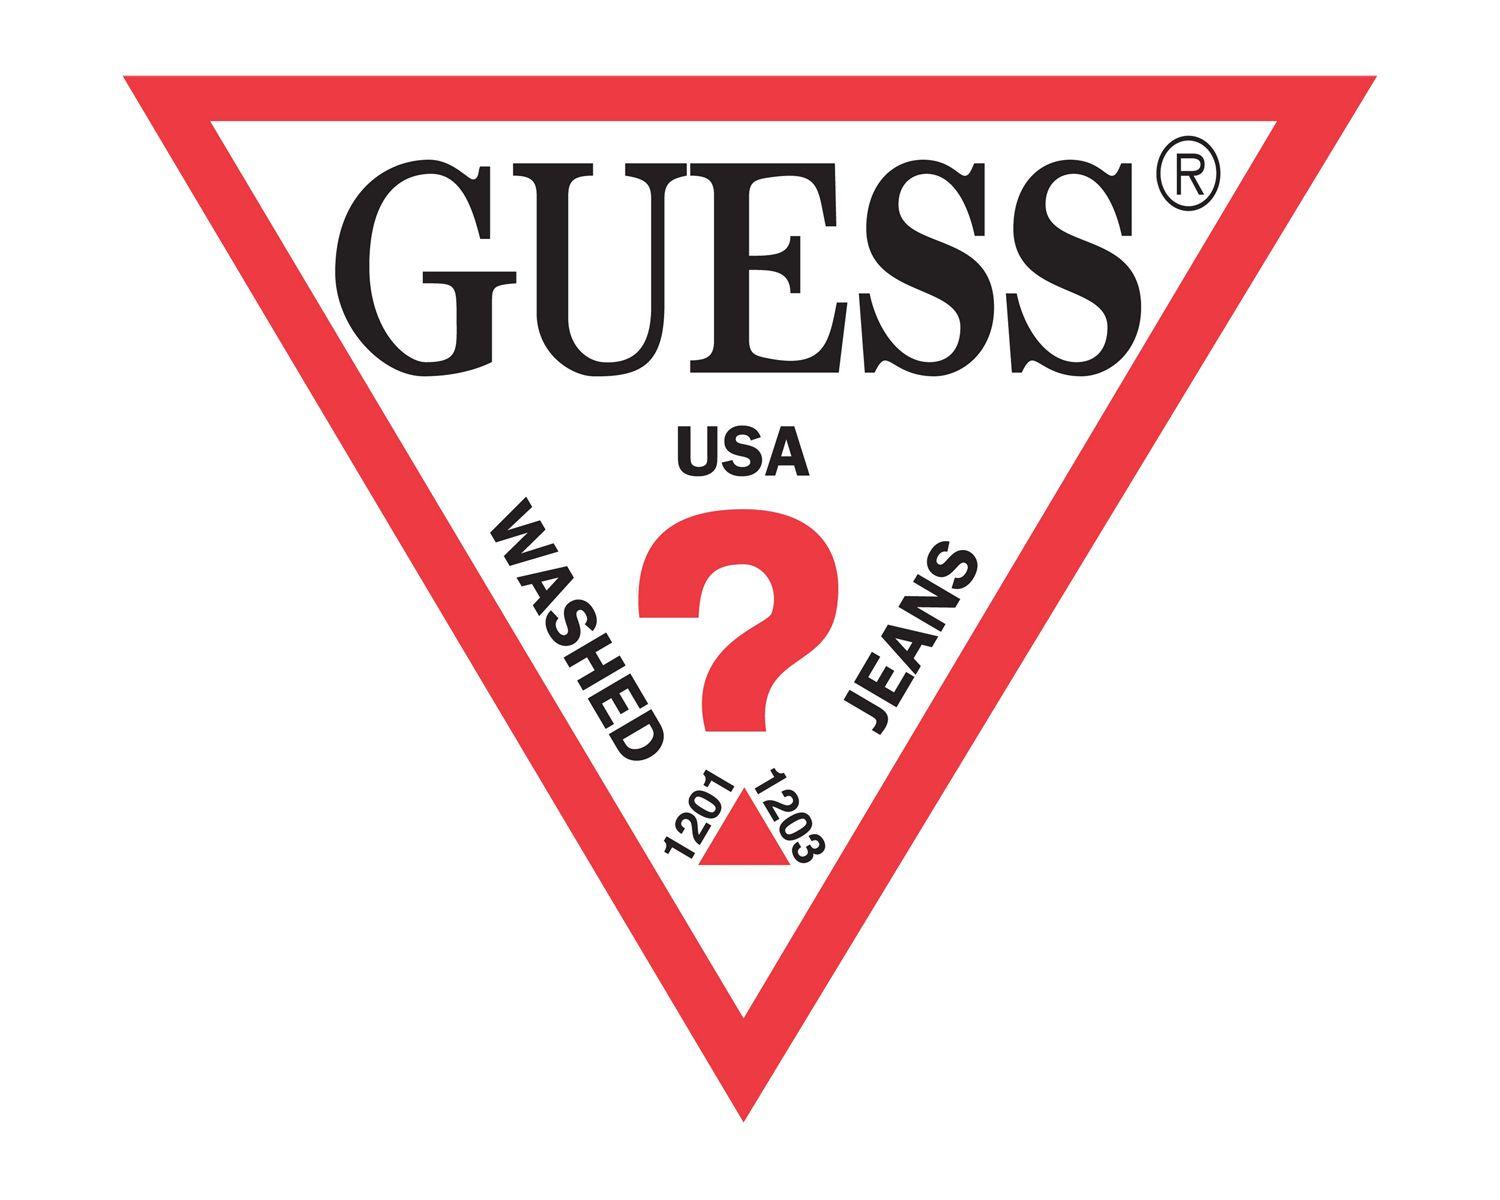 USA Red White Blue Triangle Logo - GUESS Logo, symbol, meaning, History and Evolution